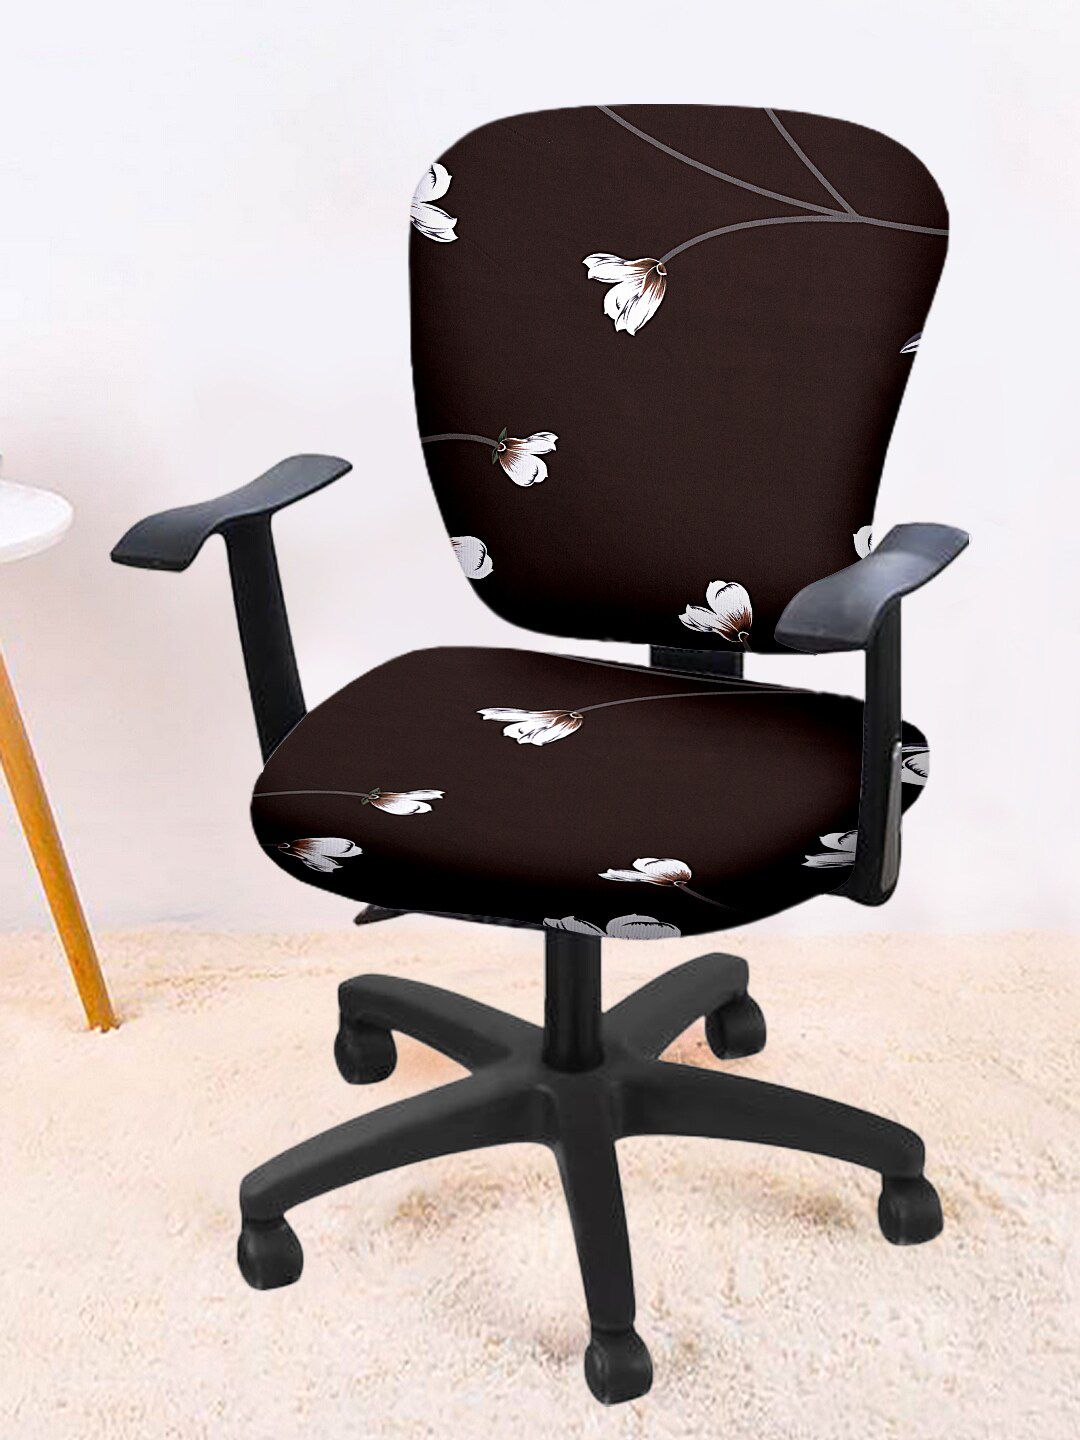 Cortina Set Of 4 Coffee Brown & White Floral Print Chair Covers Price in India